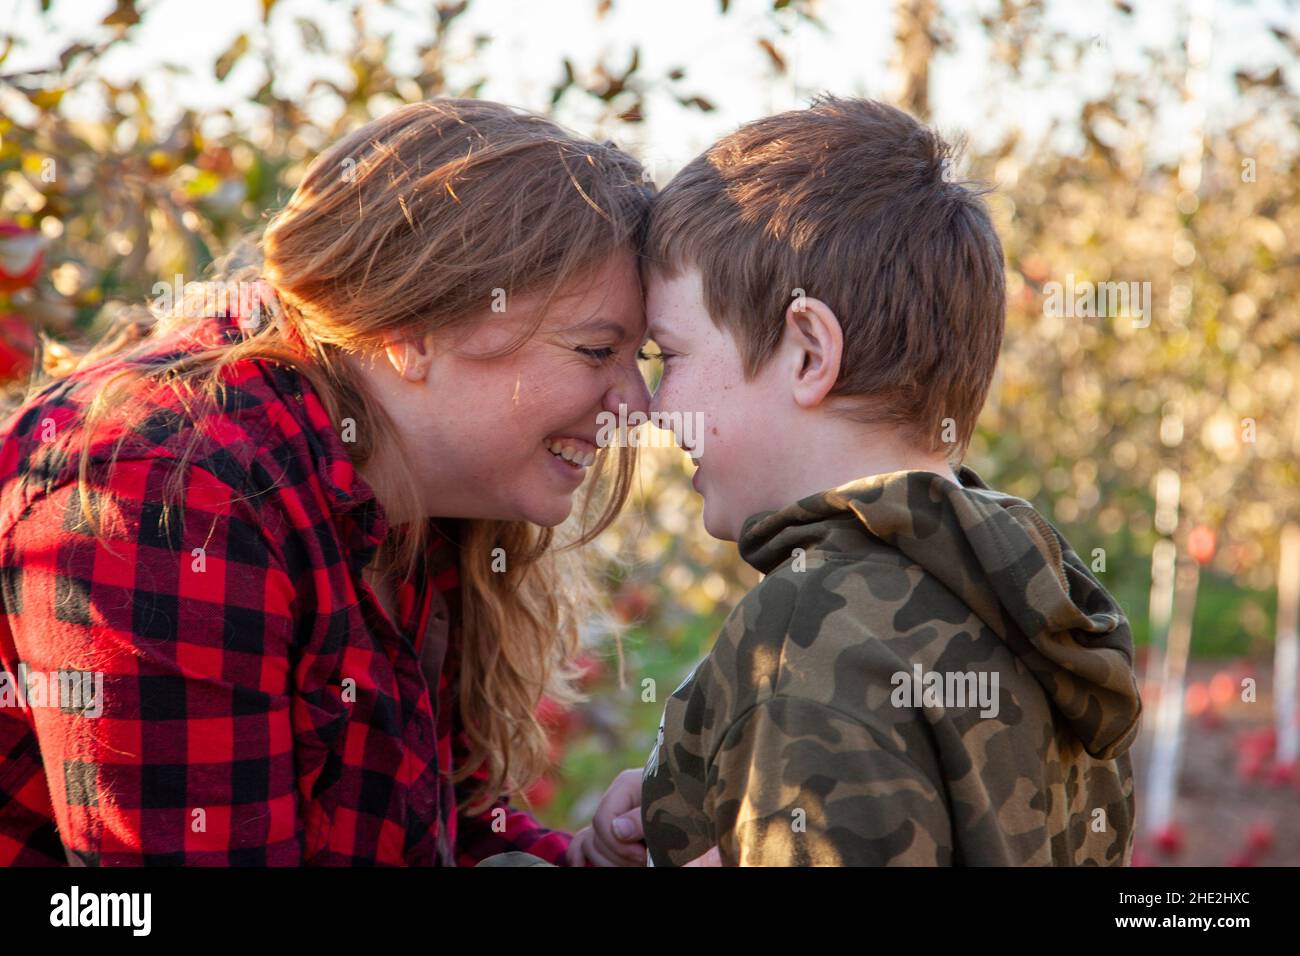 a son holds his face against his mothers in their apple orchard Stock Photo